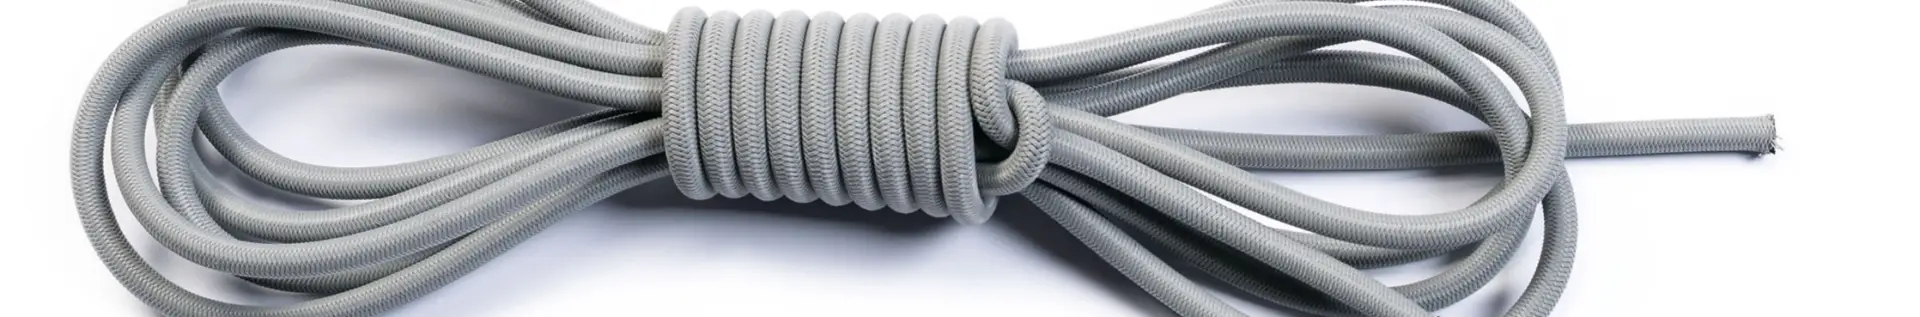 8 mm plastic cord for swimming pool covers and net... - Cod. CO008EP